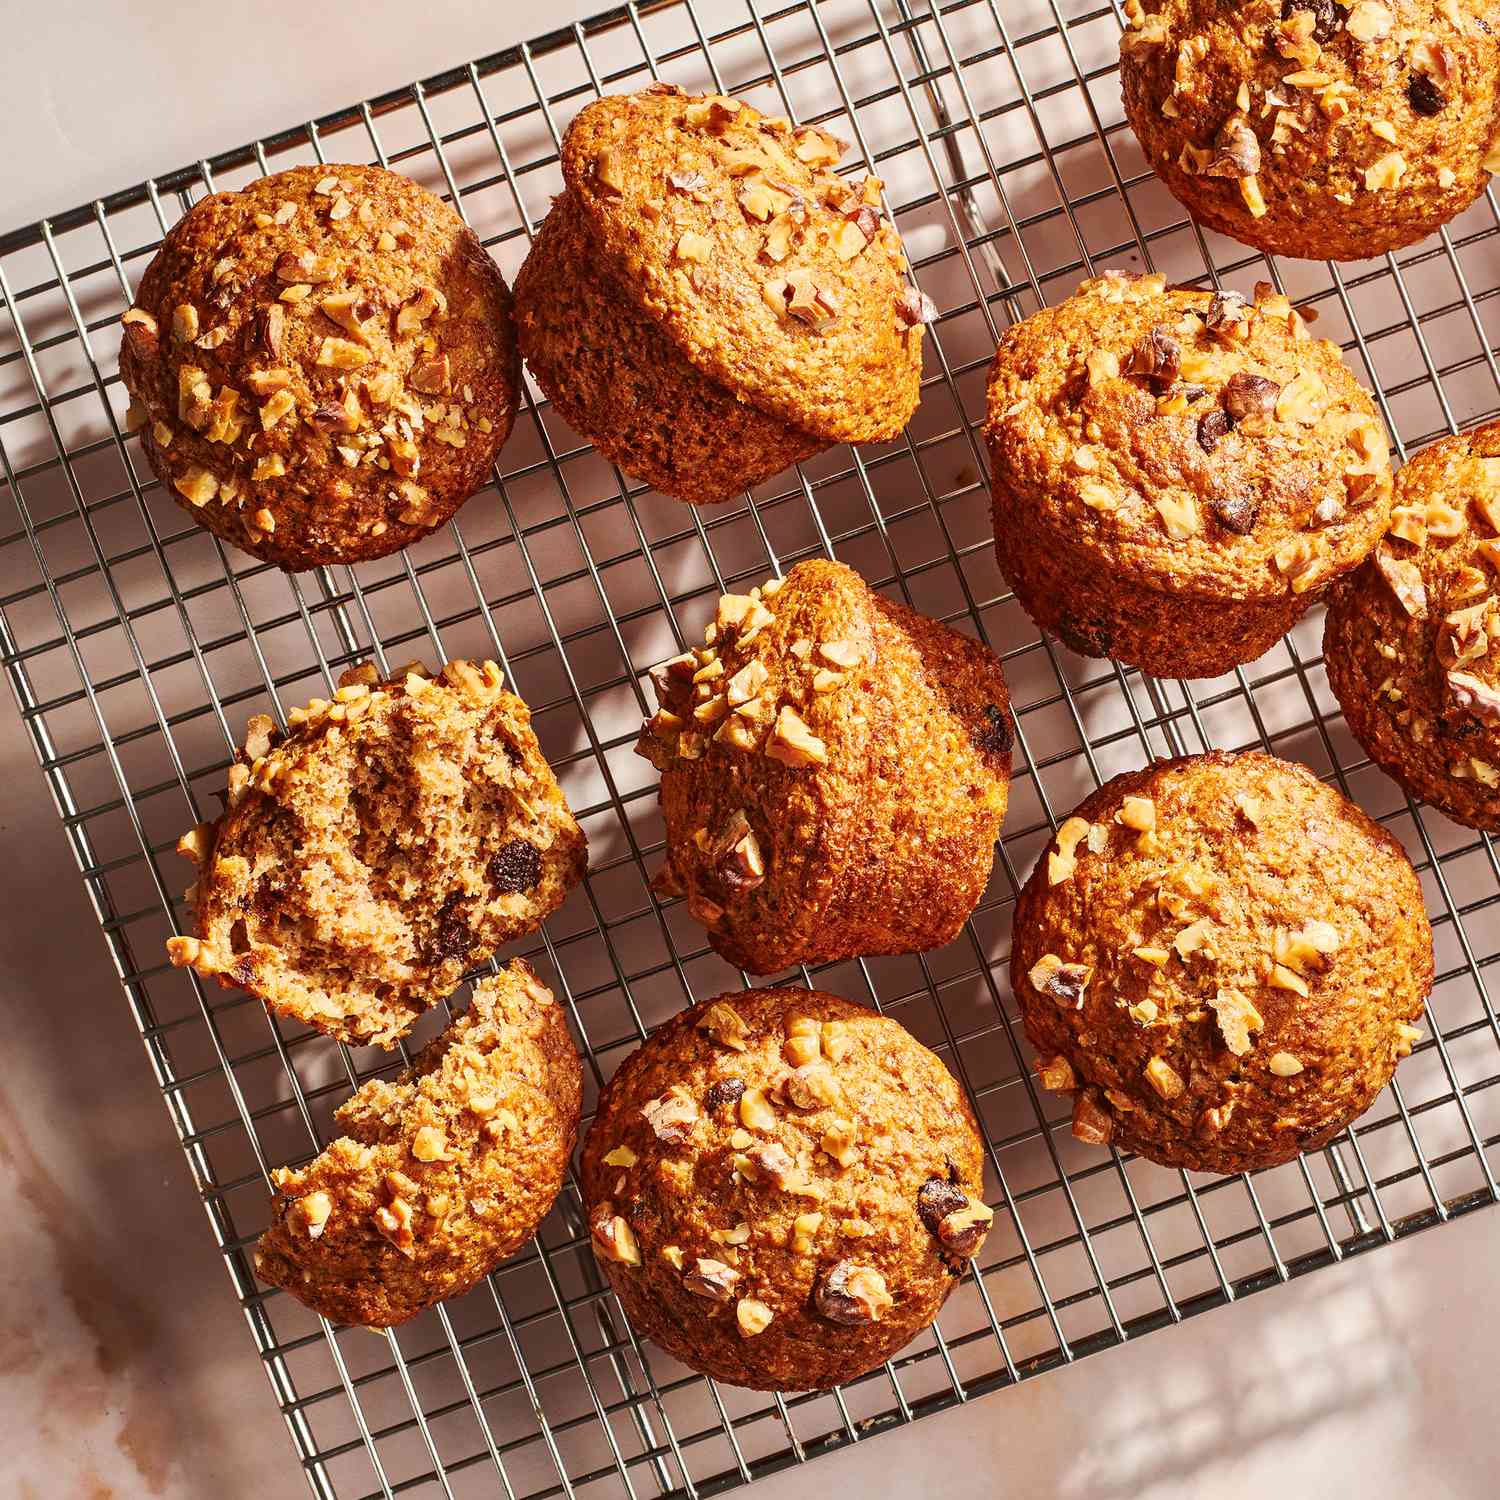 Bran Muffins: Discover the Rich History and Nutritional Benefits